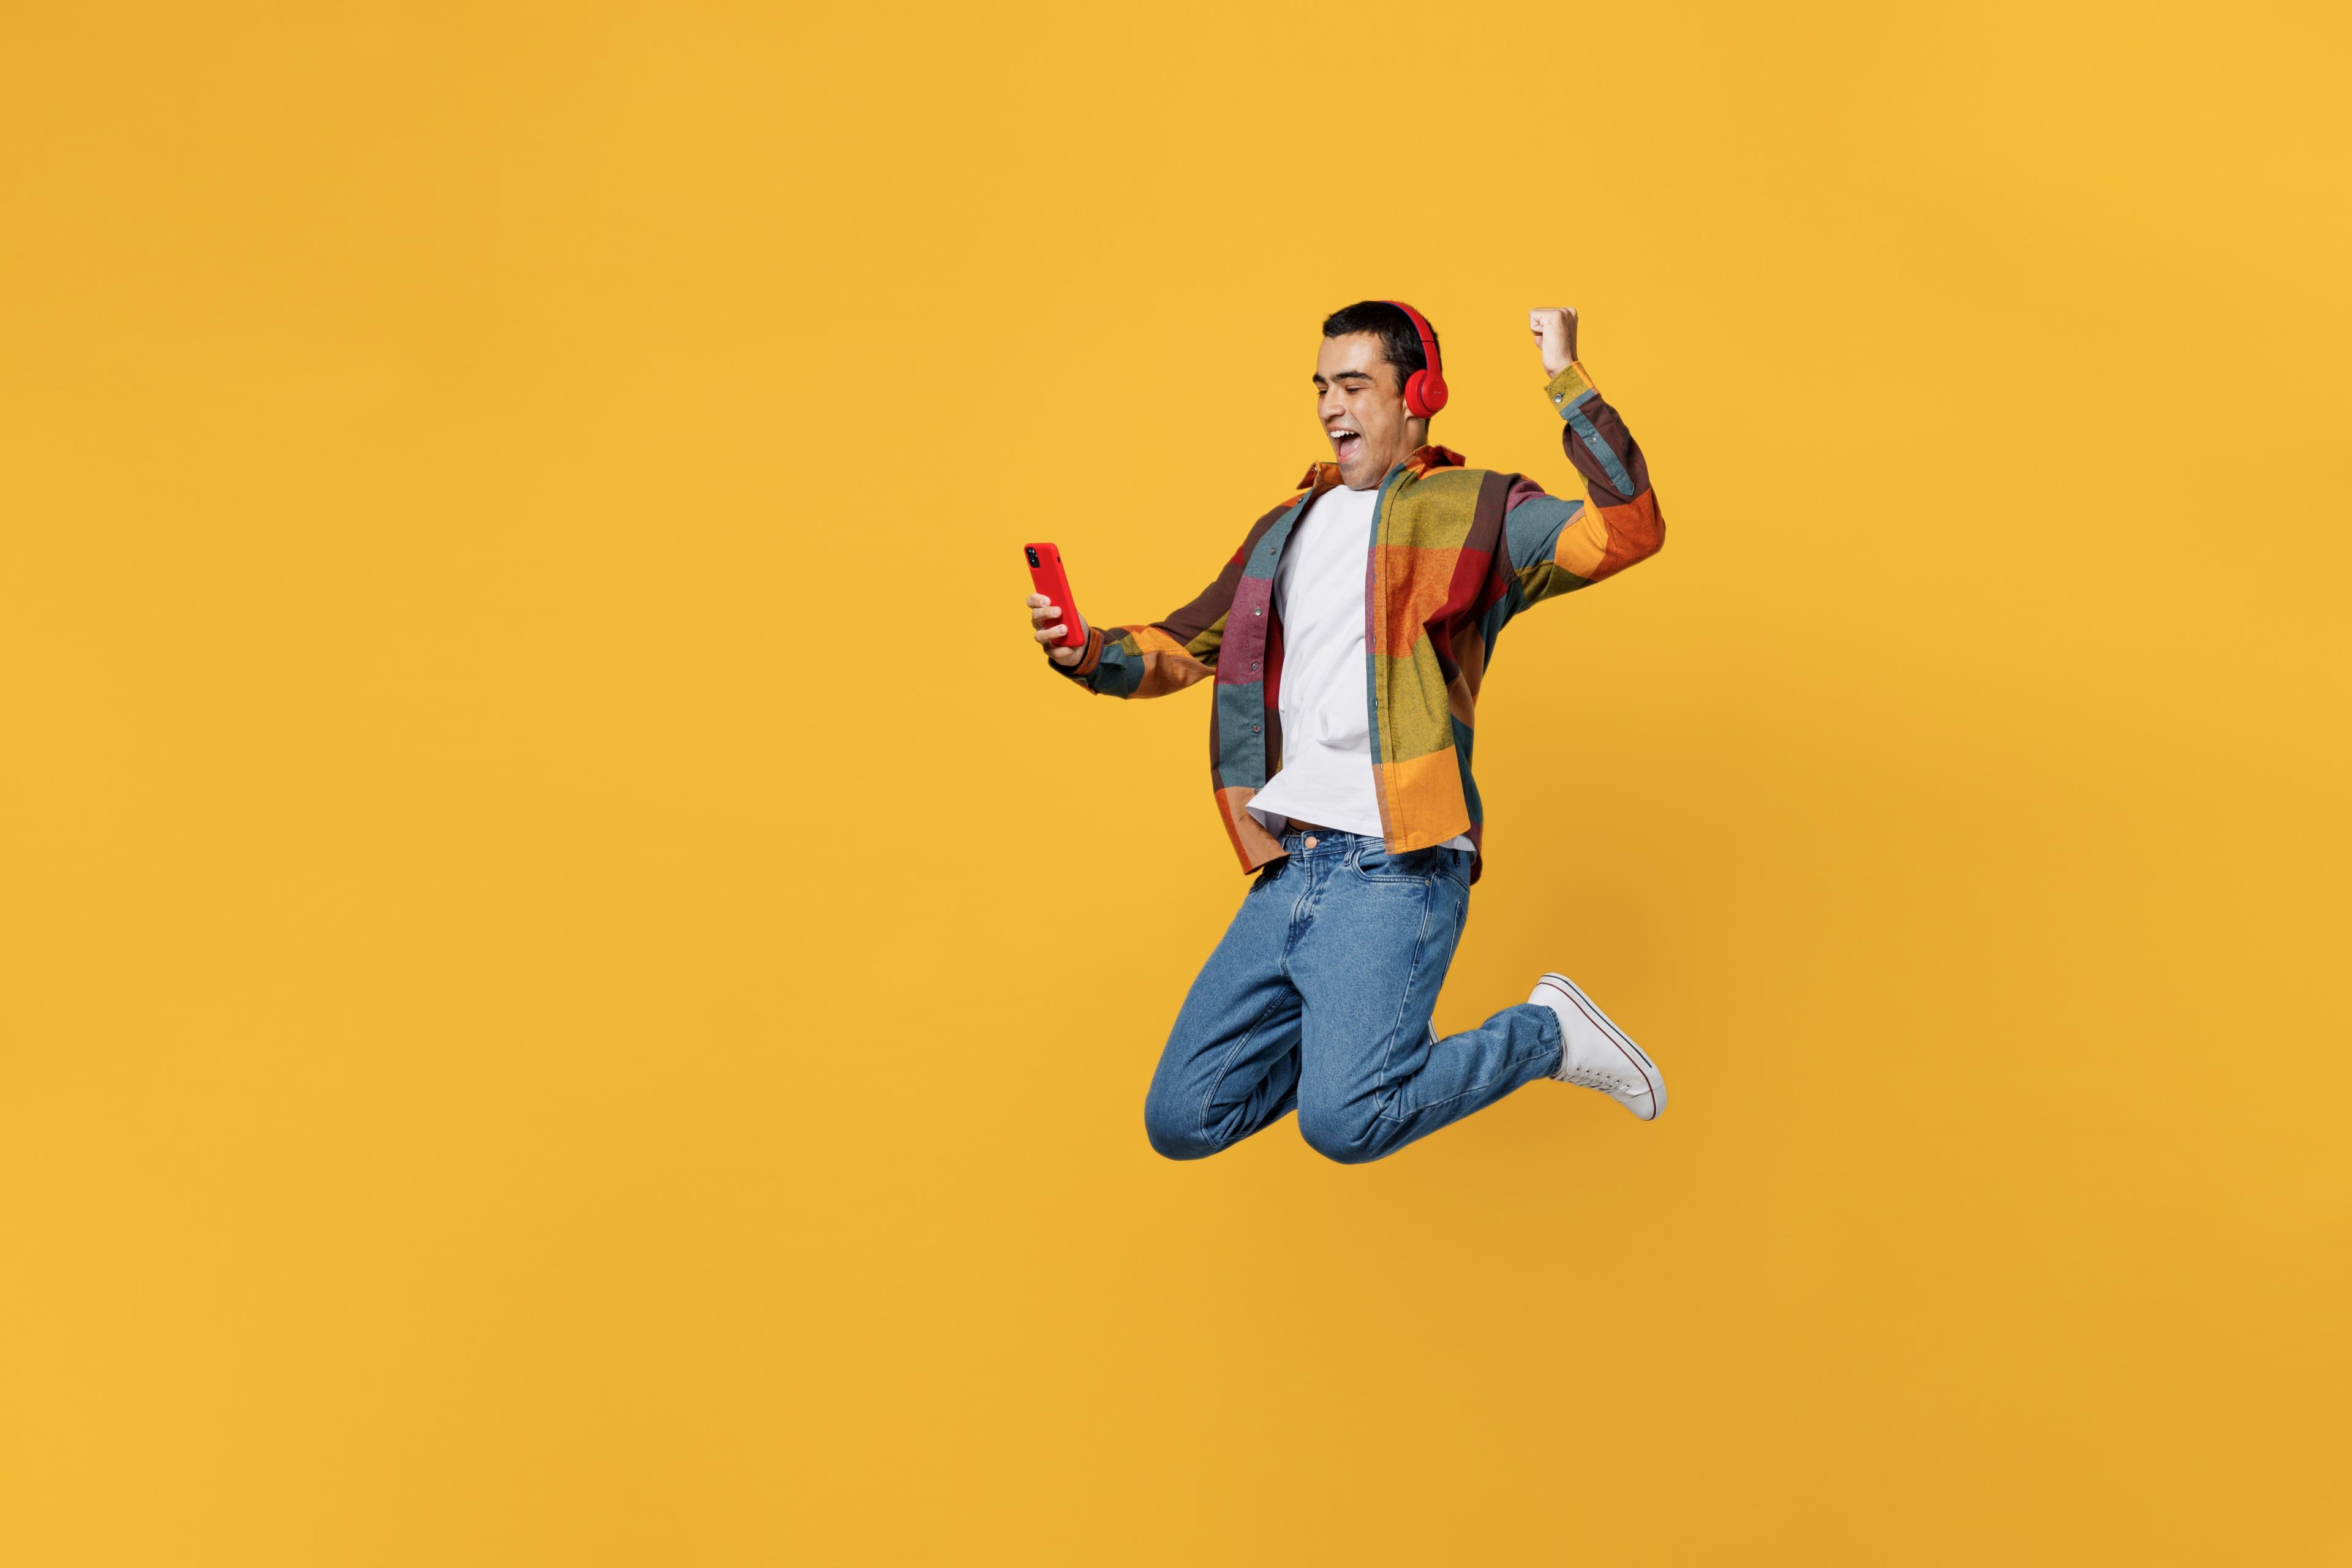 jumping, excited guy with headphones on a yellow background